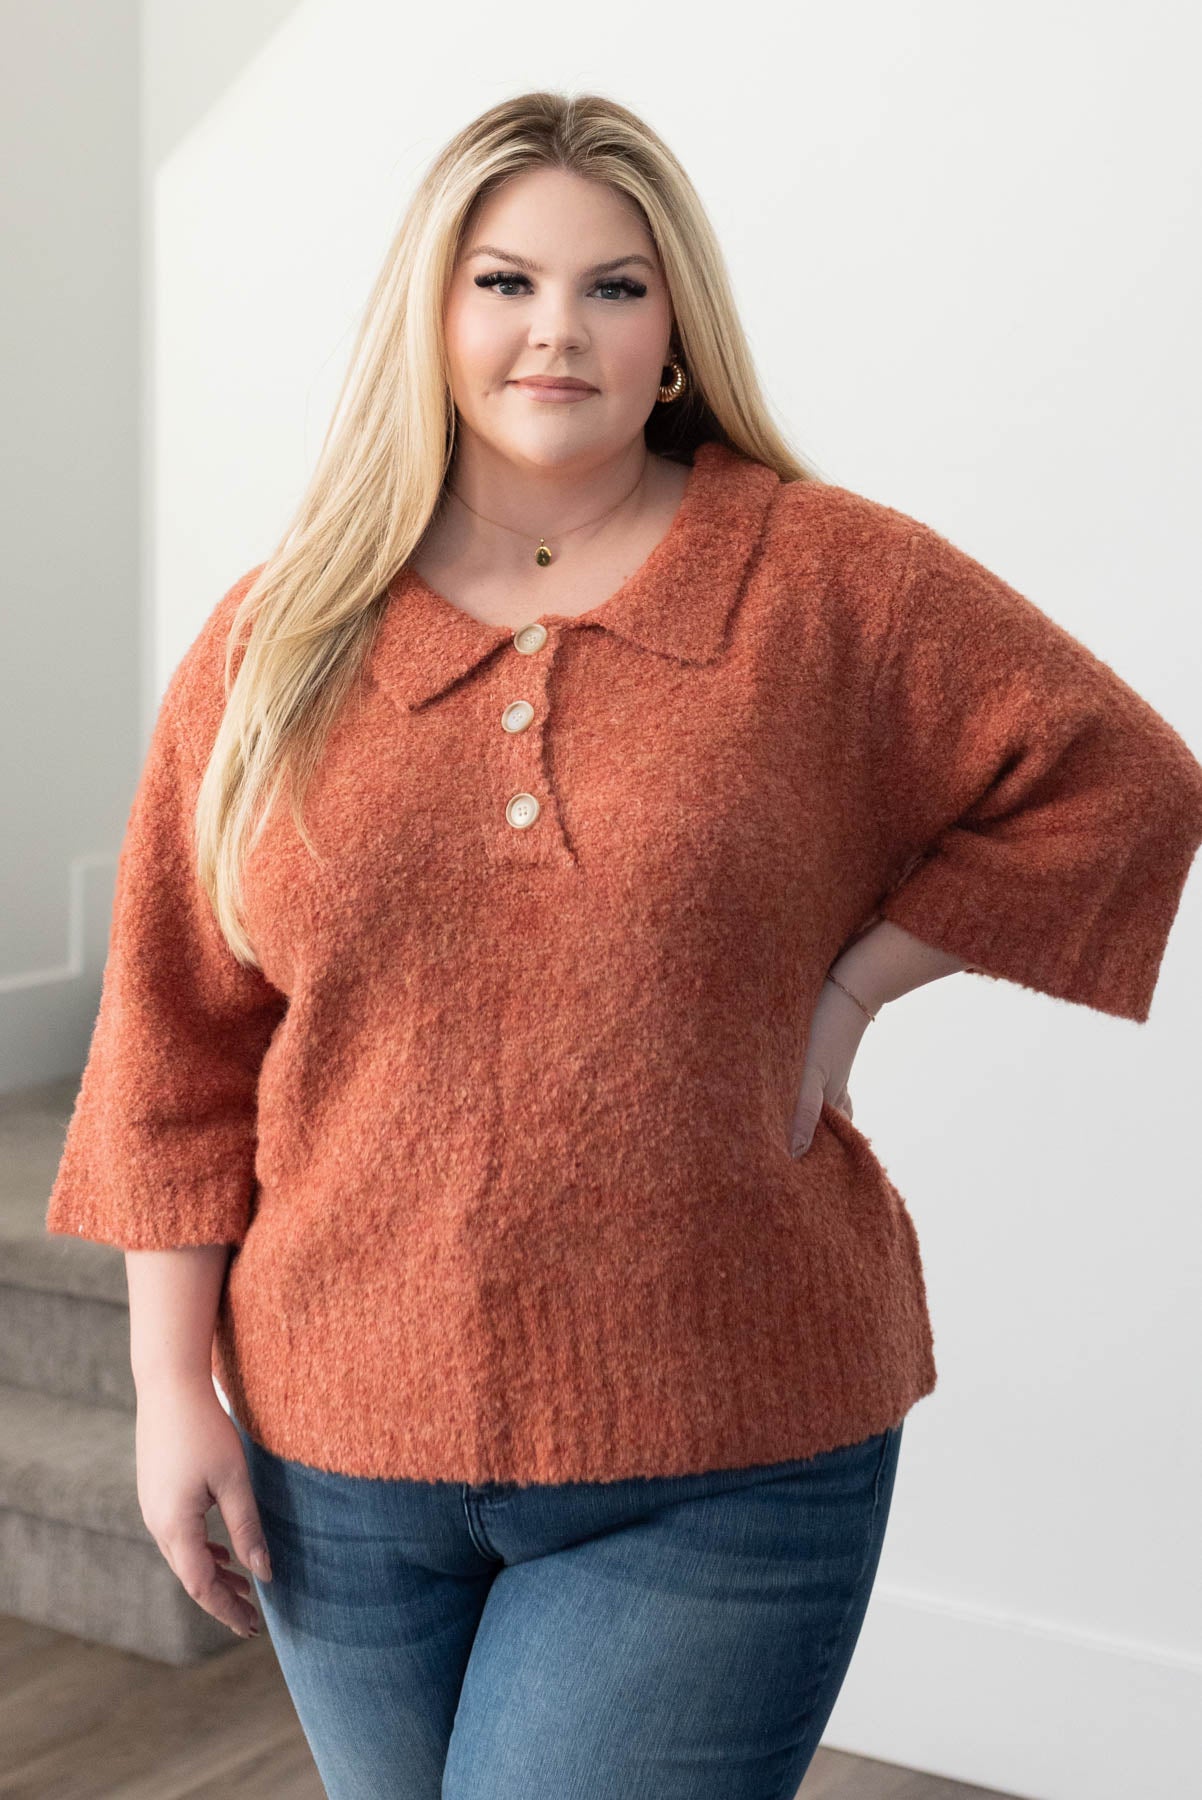 Plus size terracotta knit sweater with short sleeves